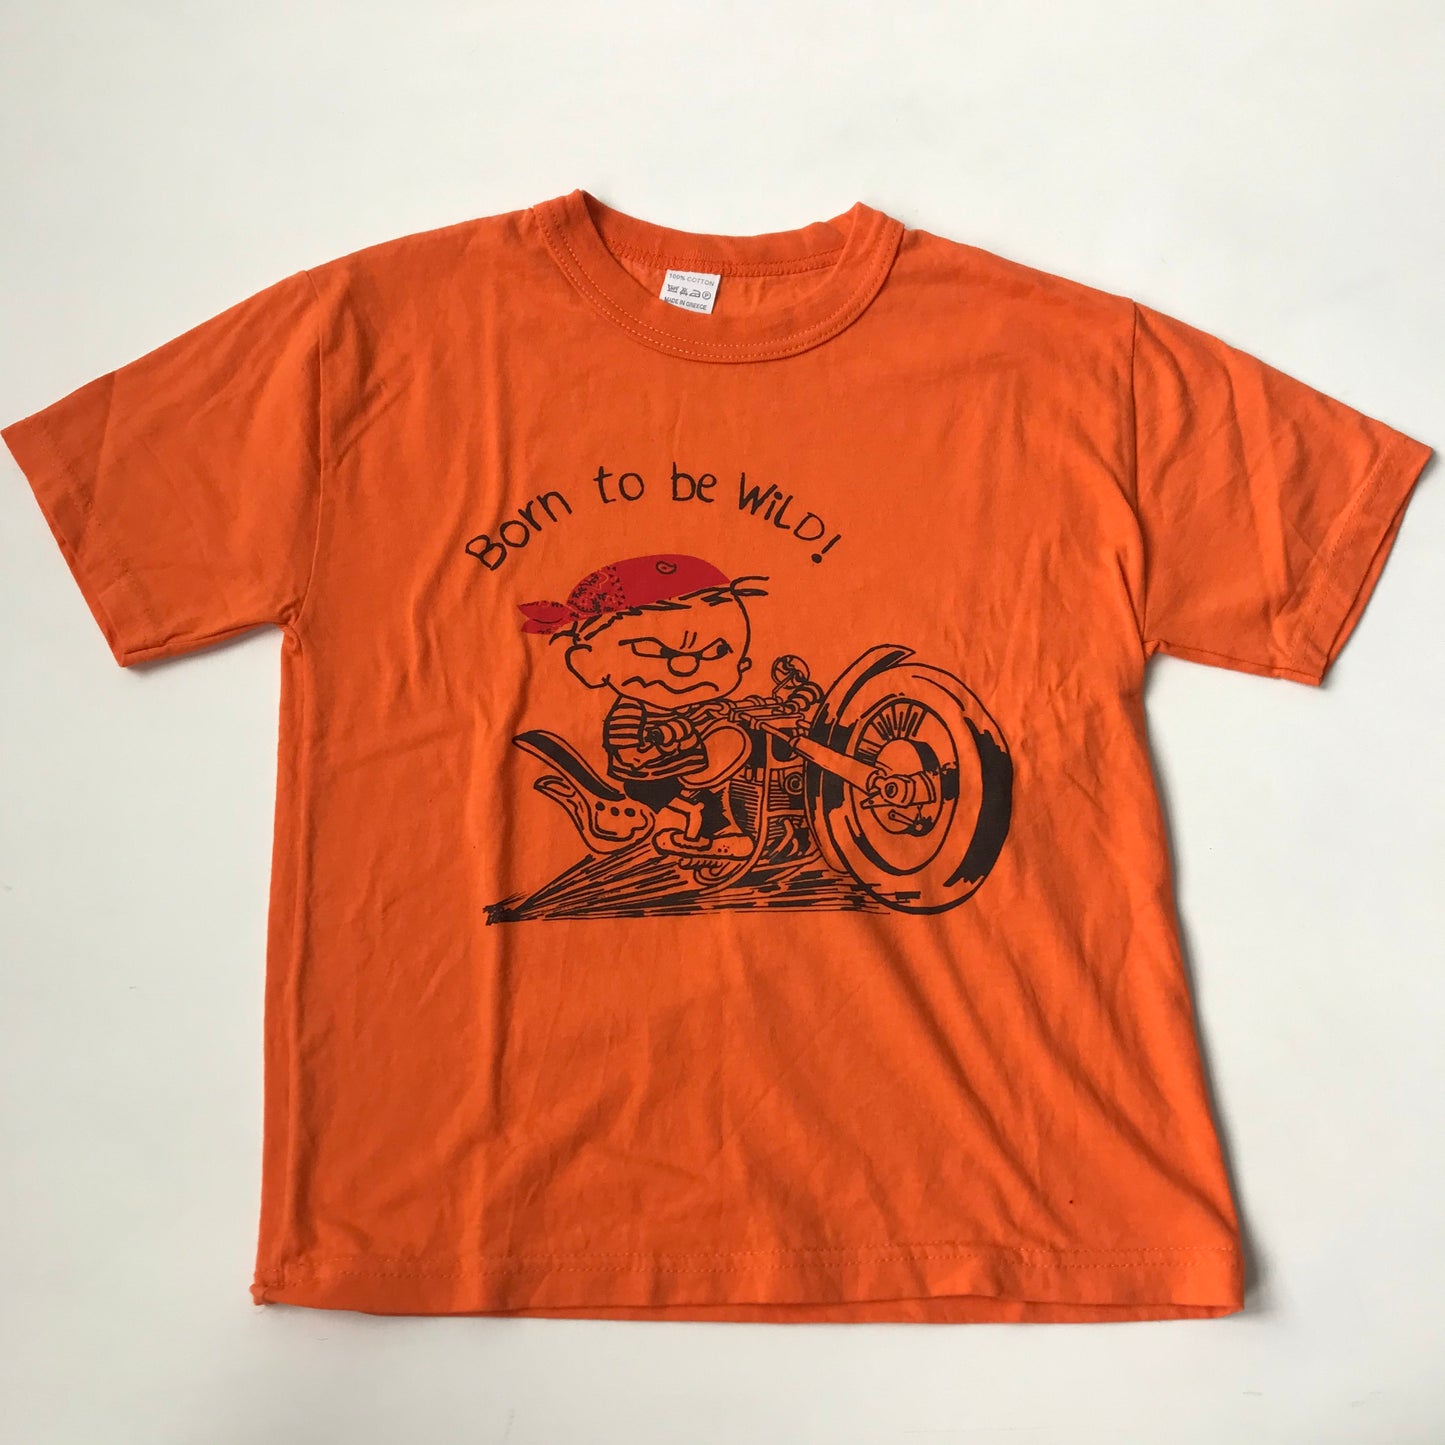 T-shirt - 'Born To Be Wild' - Age 8